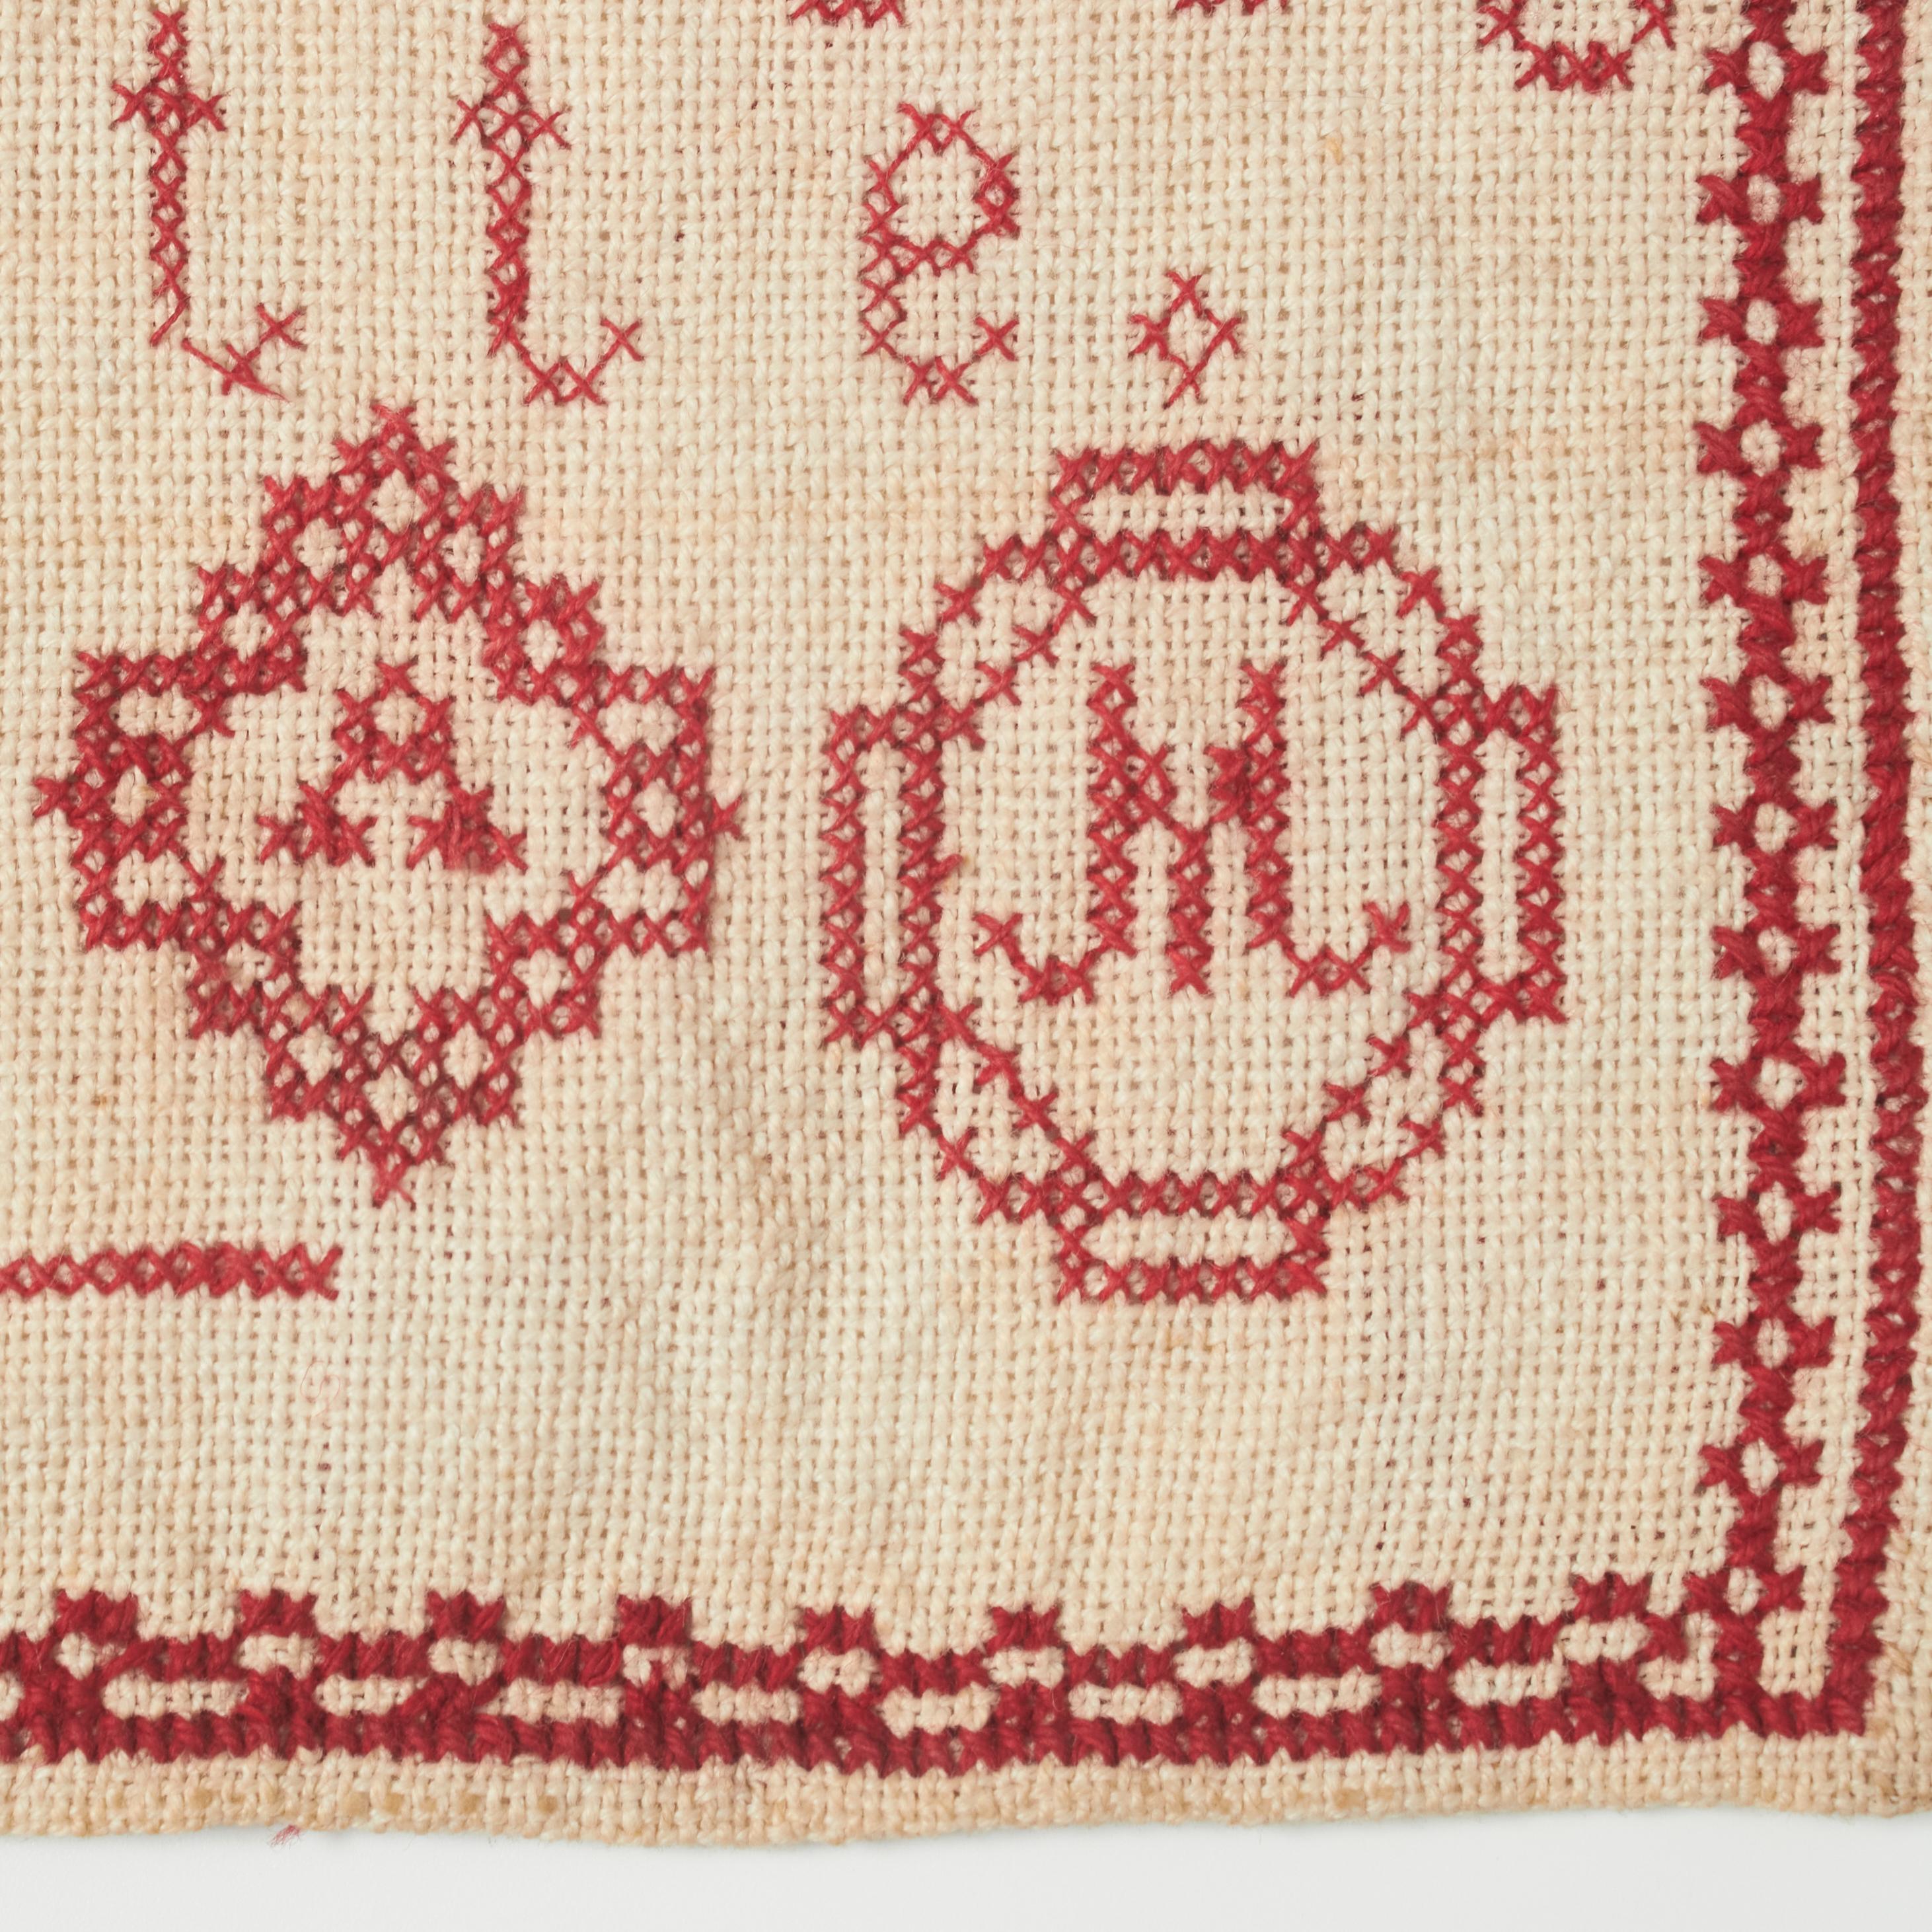 cross stitch letters and numbers